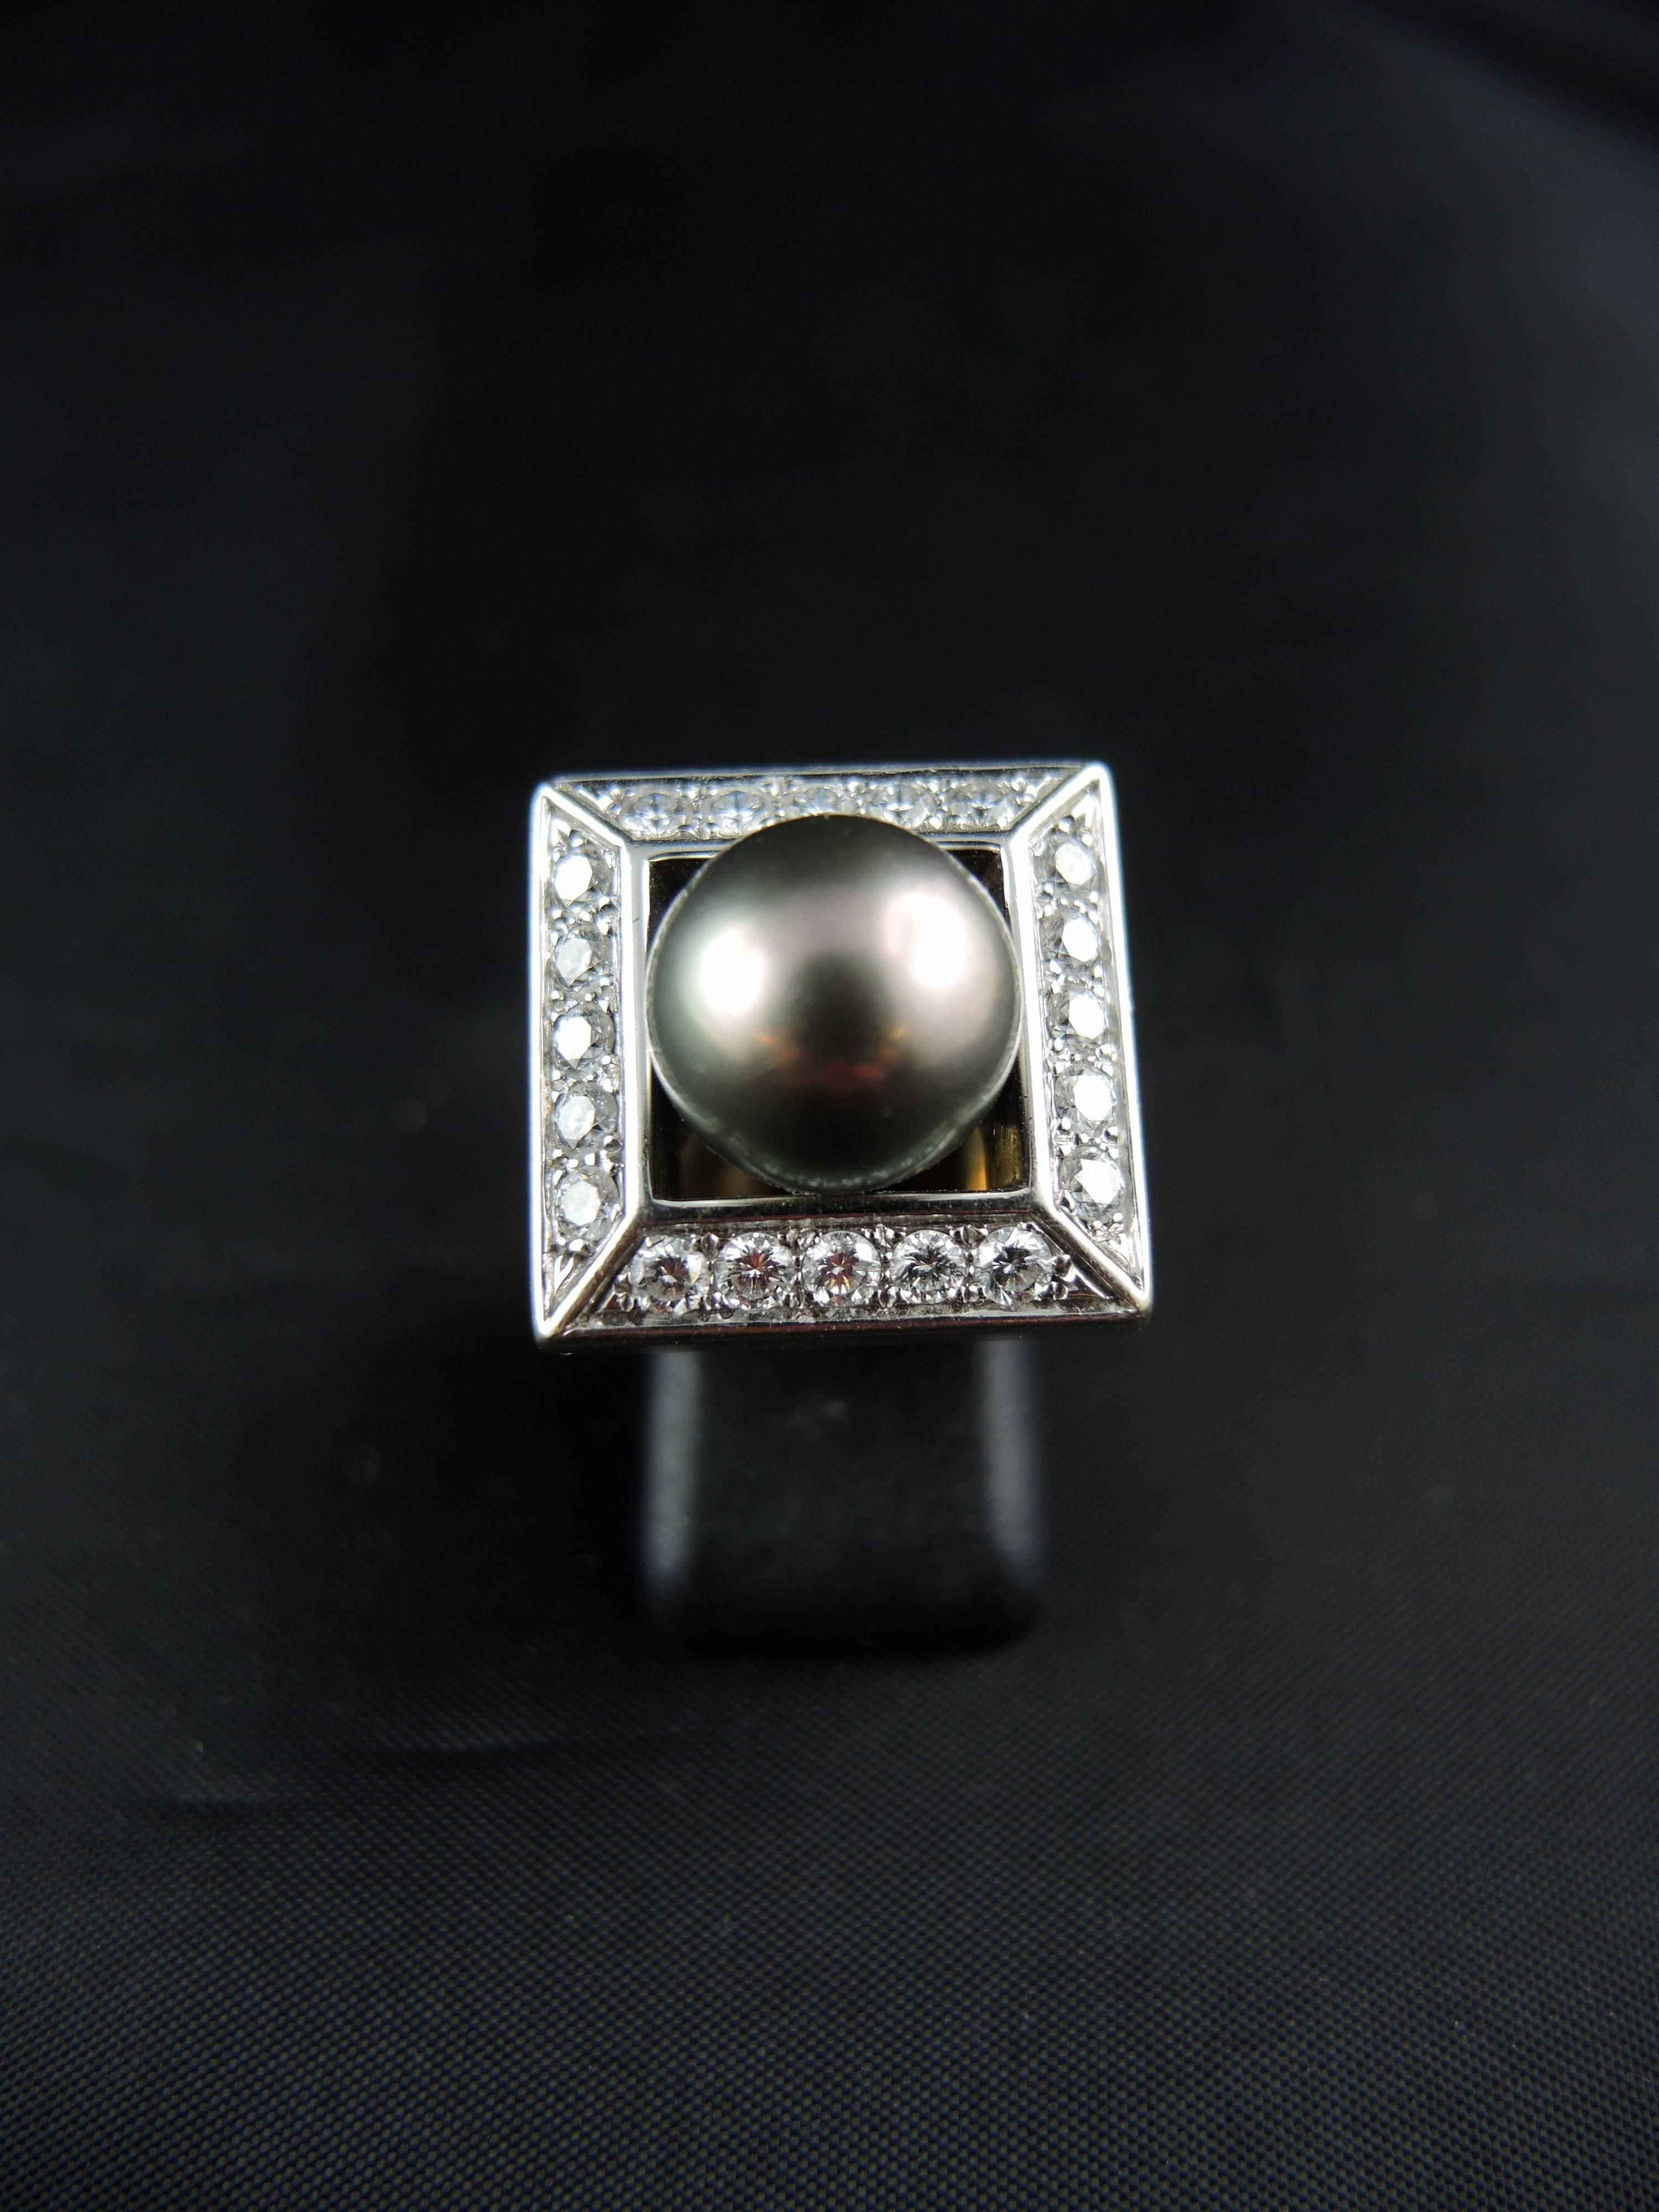 18 Kt white and yellow gold ring (quality mark: head of eagle) set with a central Tahitian black cultured pearl, surrounded by modern cut diamonds, total weight apx 1,00 Ct.

Beautiful modern french work.

Weight: 18,70g
Ring size: 52 (diameter